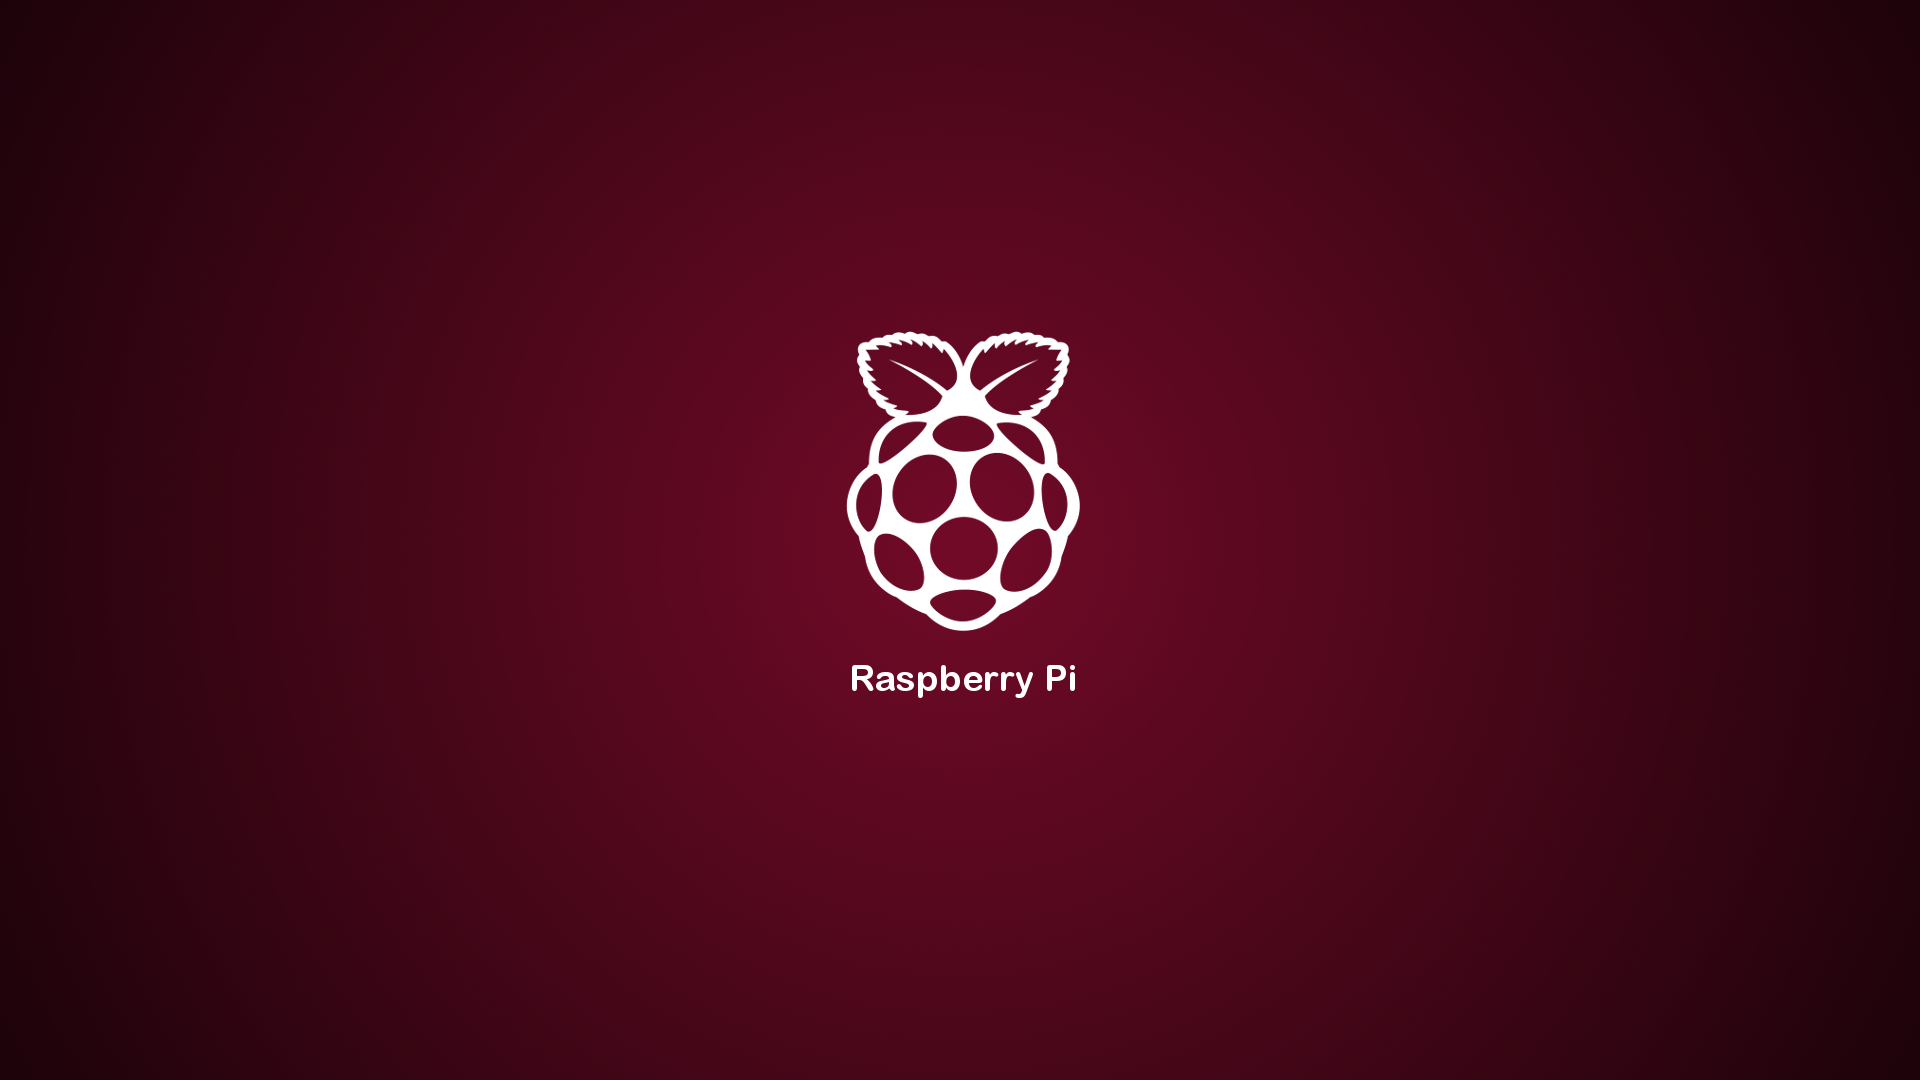 General 1920x1080 Raspberry Pi Linux minimalism fruit red background operating system